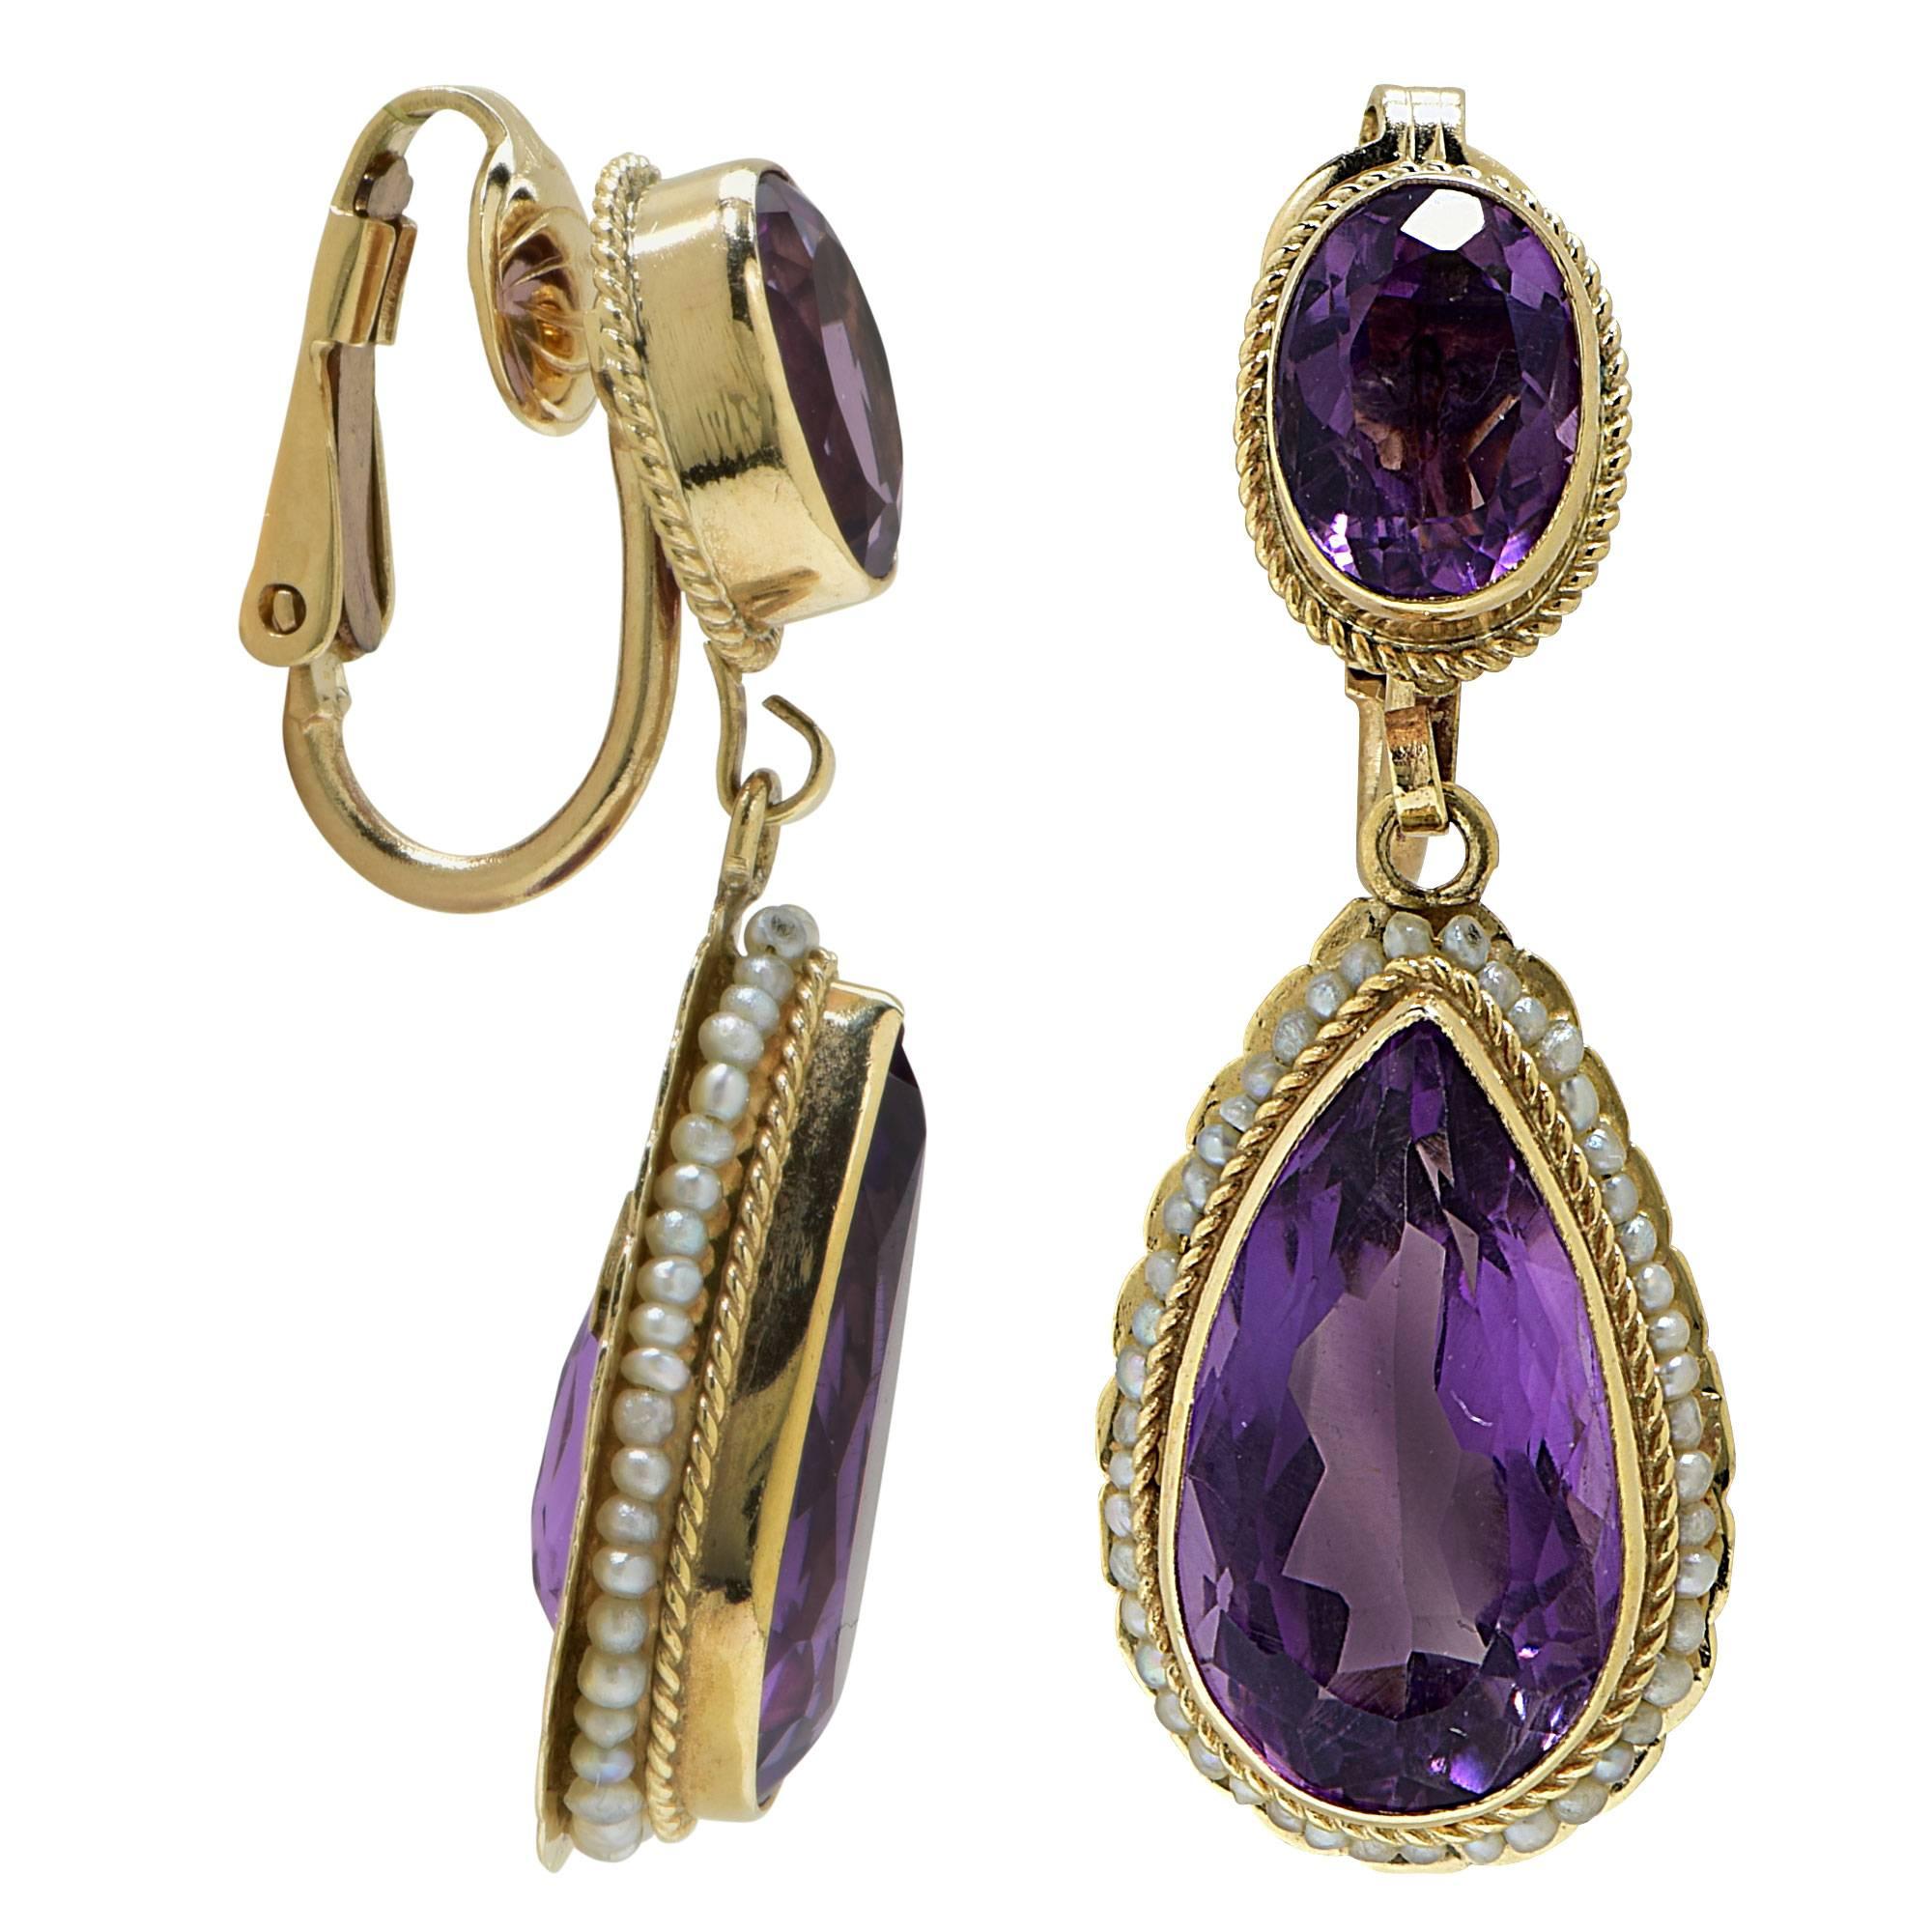 14k yellow gold Amethyst dangle earrings.

Metal weight: 9.01 grams

These earrings are accompanied by a retail appraisal performed by a GIA Graduate Gemologist.